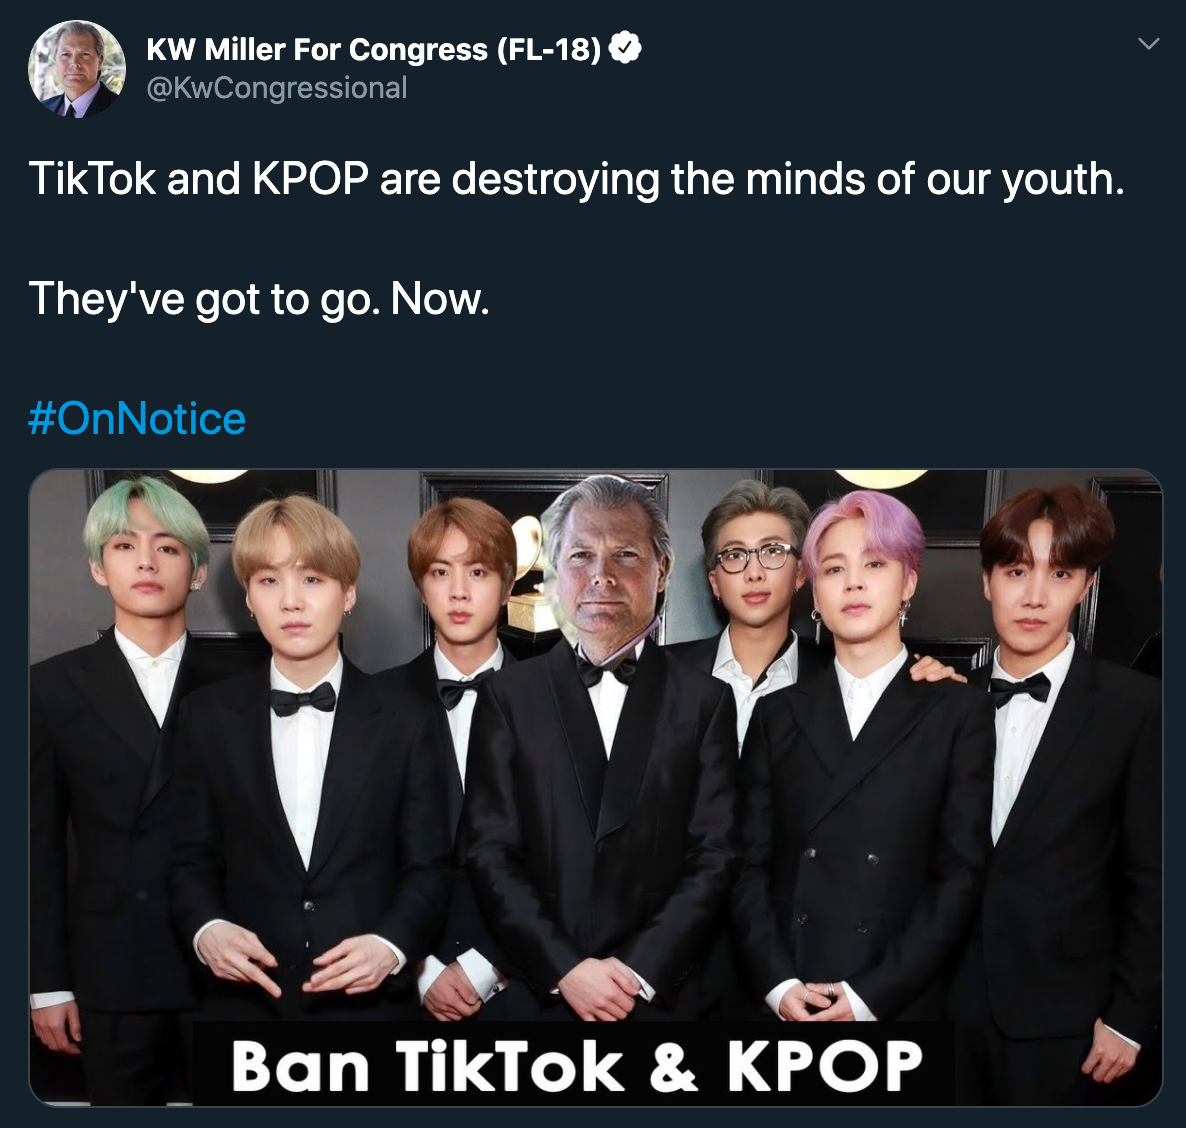 bts army - Kw Miller For Congress Fl18 Tik Tok and Kpop are destroying the minds of our youth. They've got to go. Now. Ban TikTok & Kpop